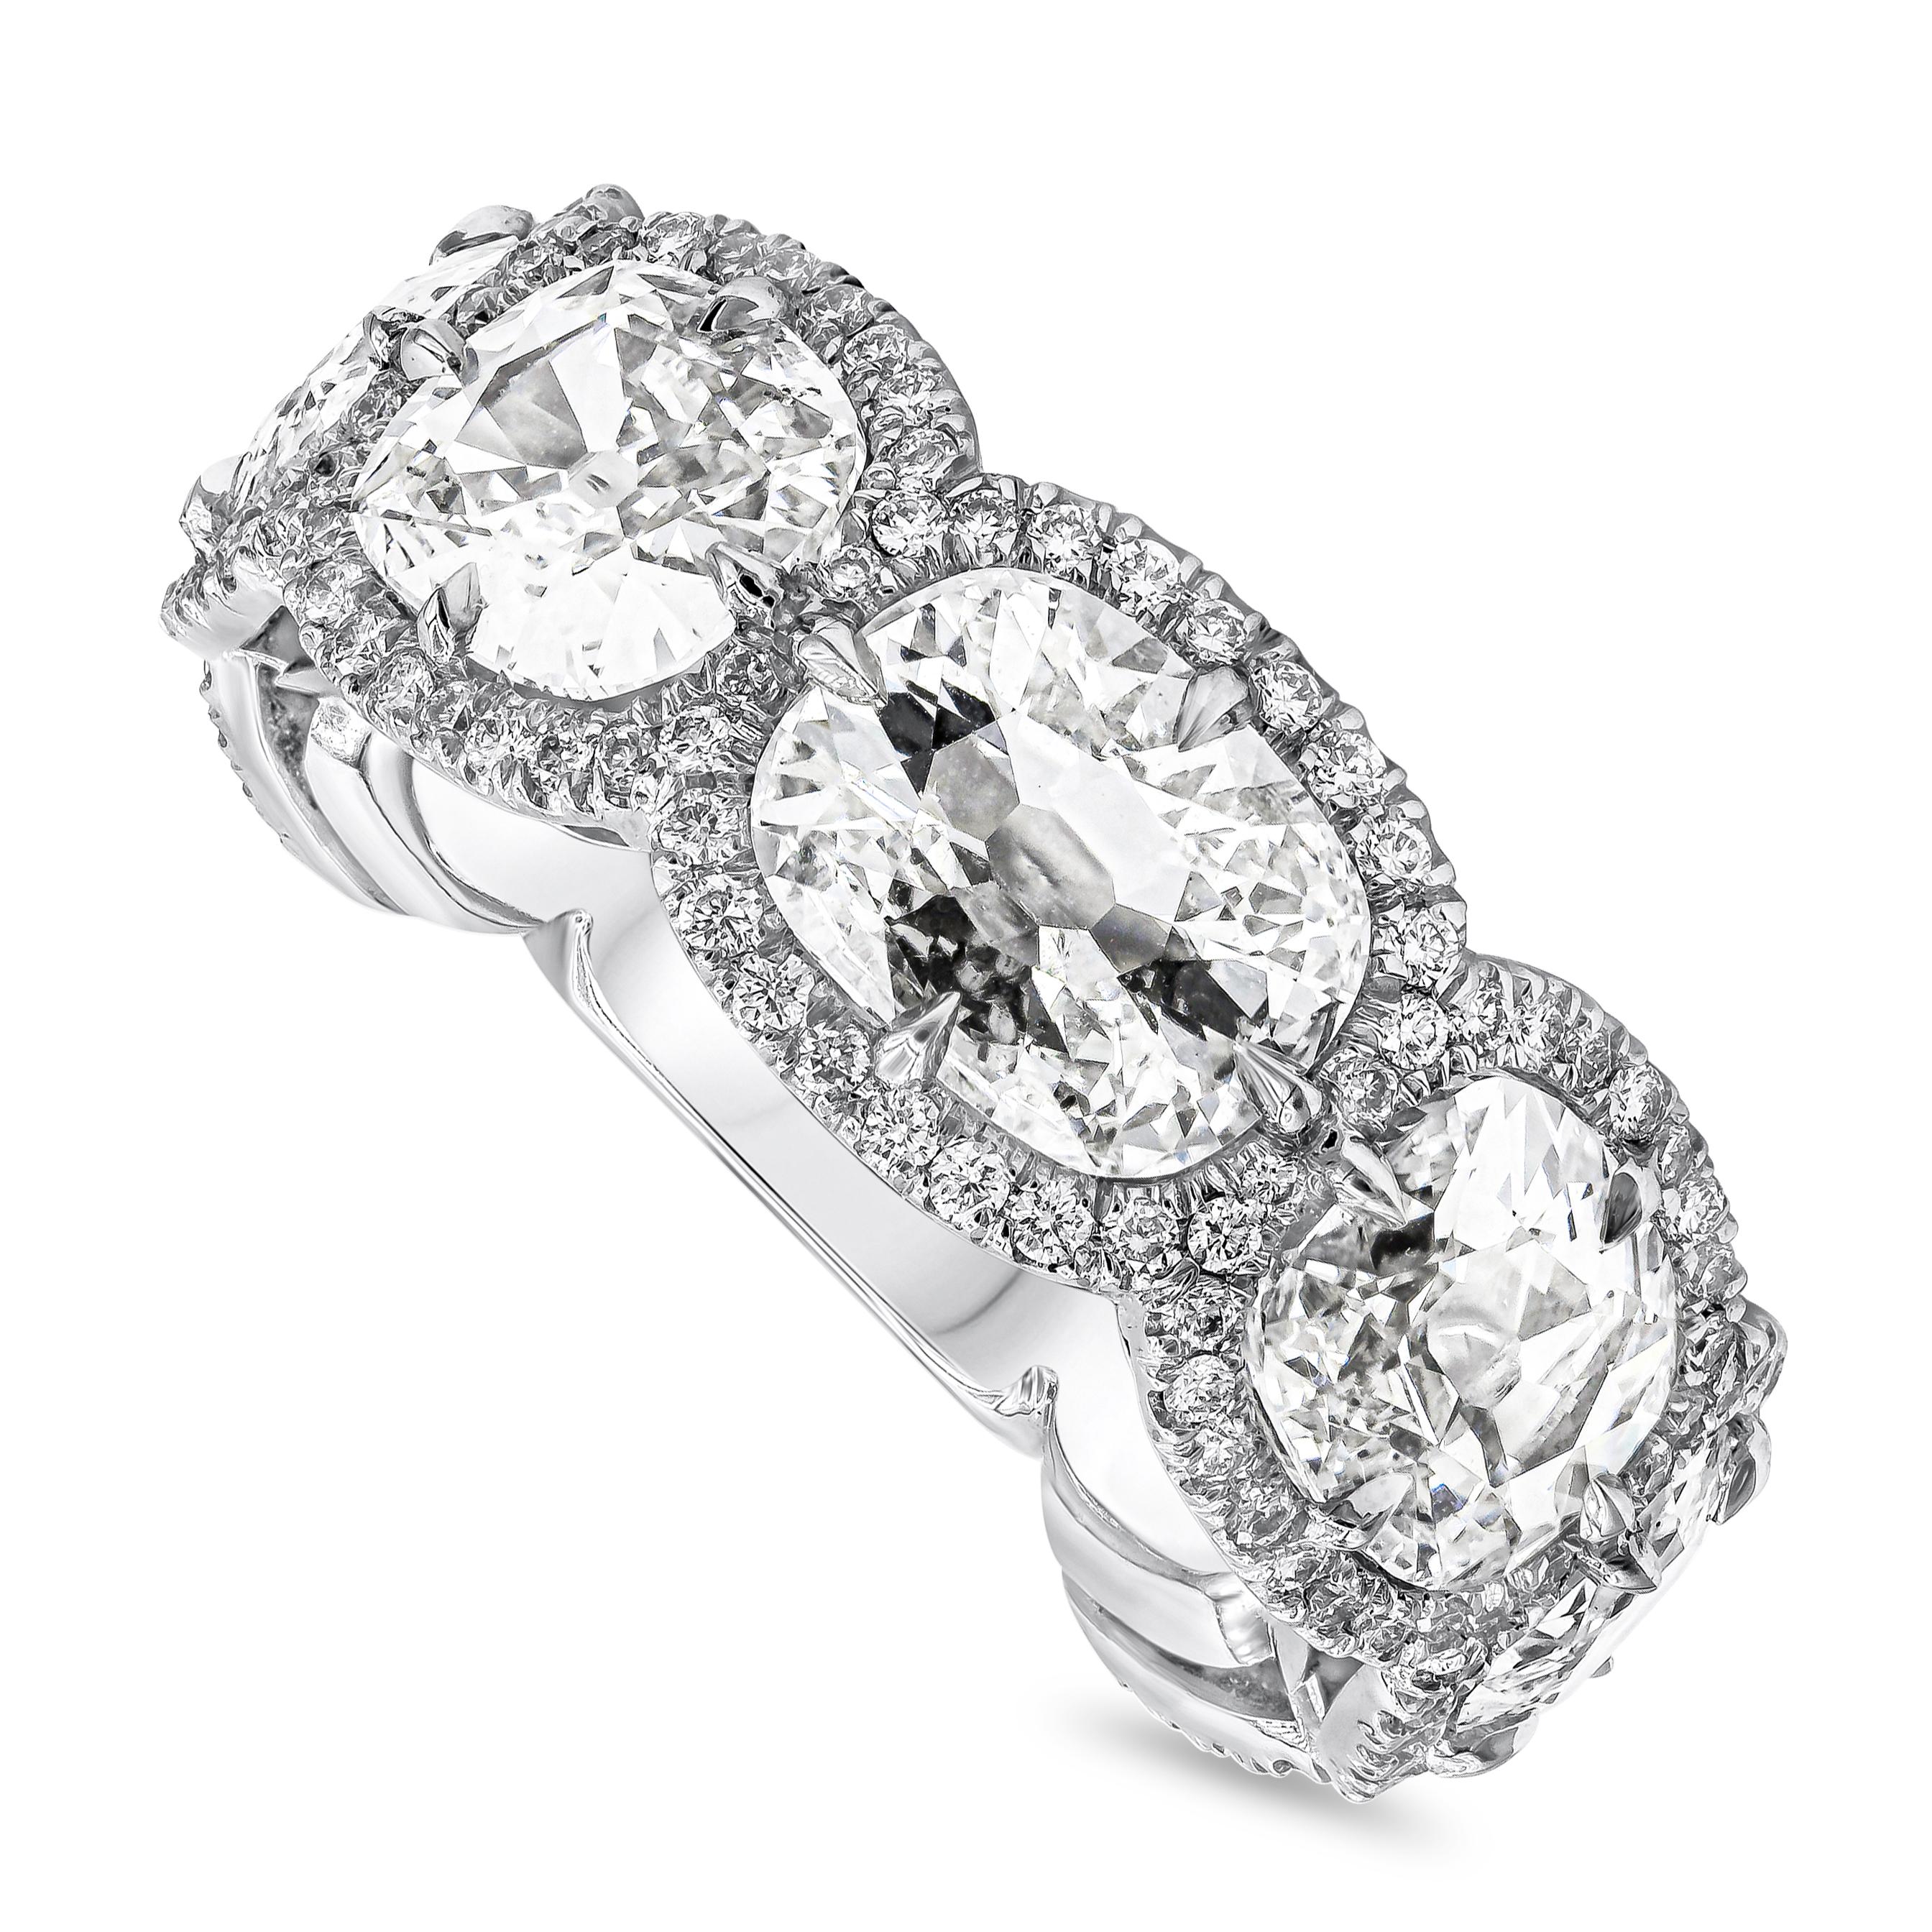 Well crafted seven stone diamond halo wedding band showcasing cushion cut diamonds weighing 5.96 carats total, each set on a four prong halo setting. Accent brilliant round diamonds weighs 0.76 carats total. Finely made in polished platinum. Size